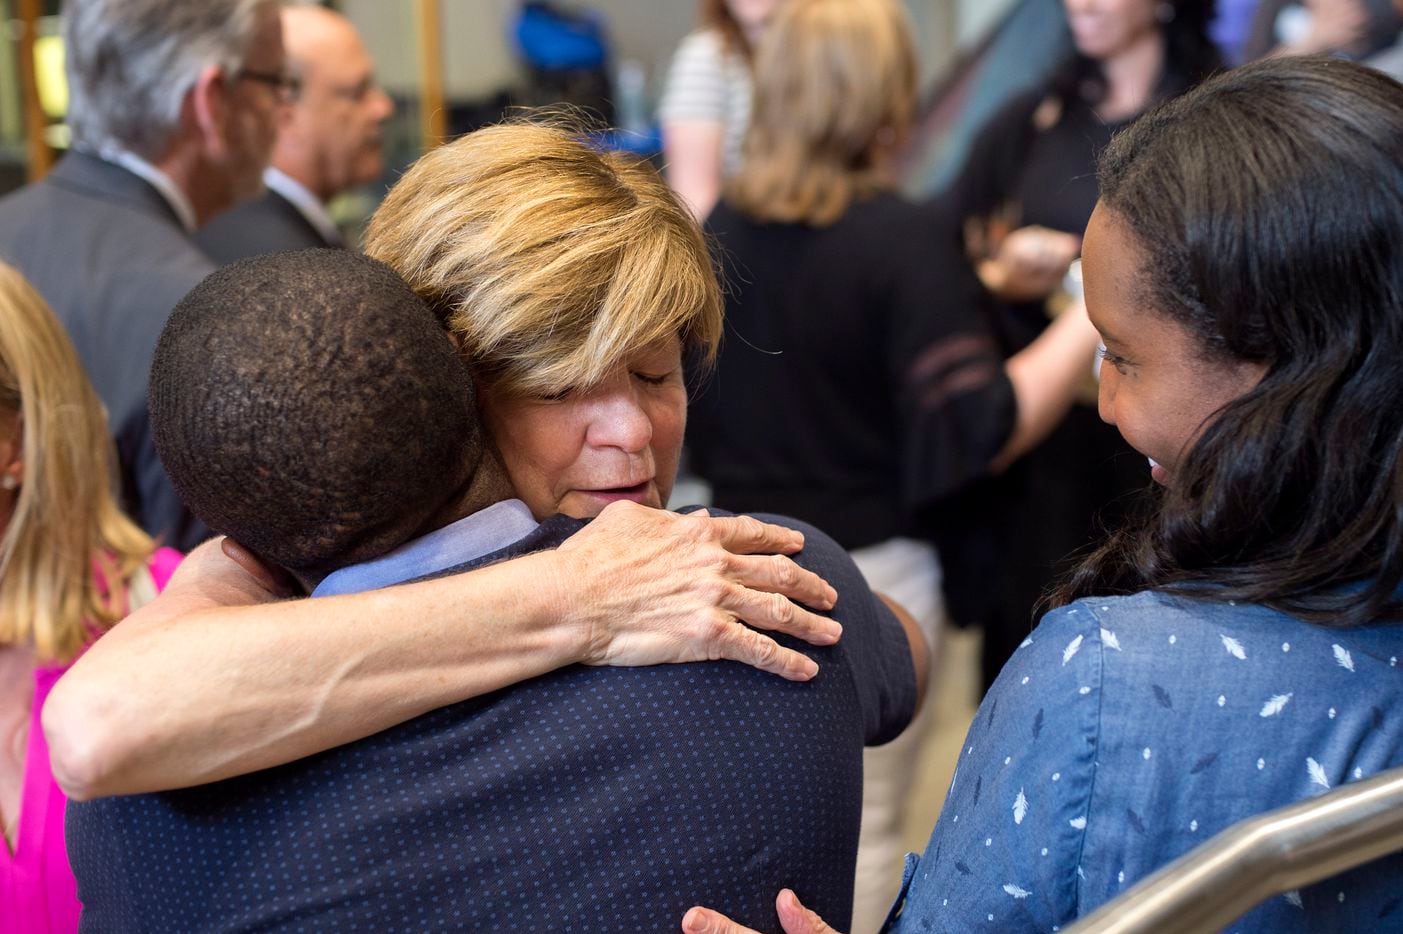 Dallas Morning News columnist Sharon Grigsby hugs lawyer Chequan Lewis before a forum on...